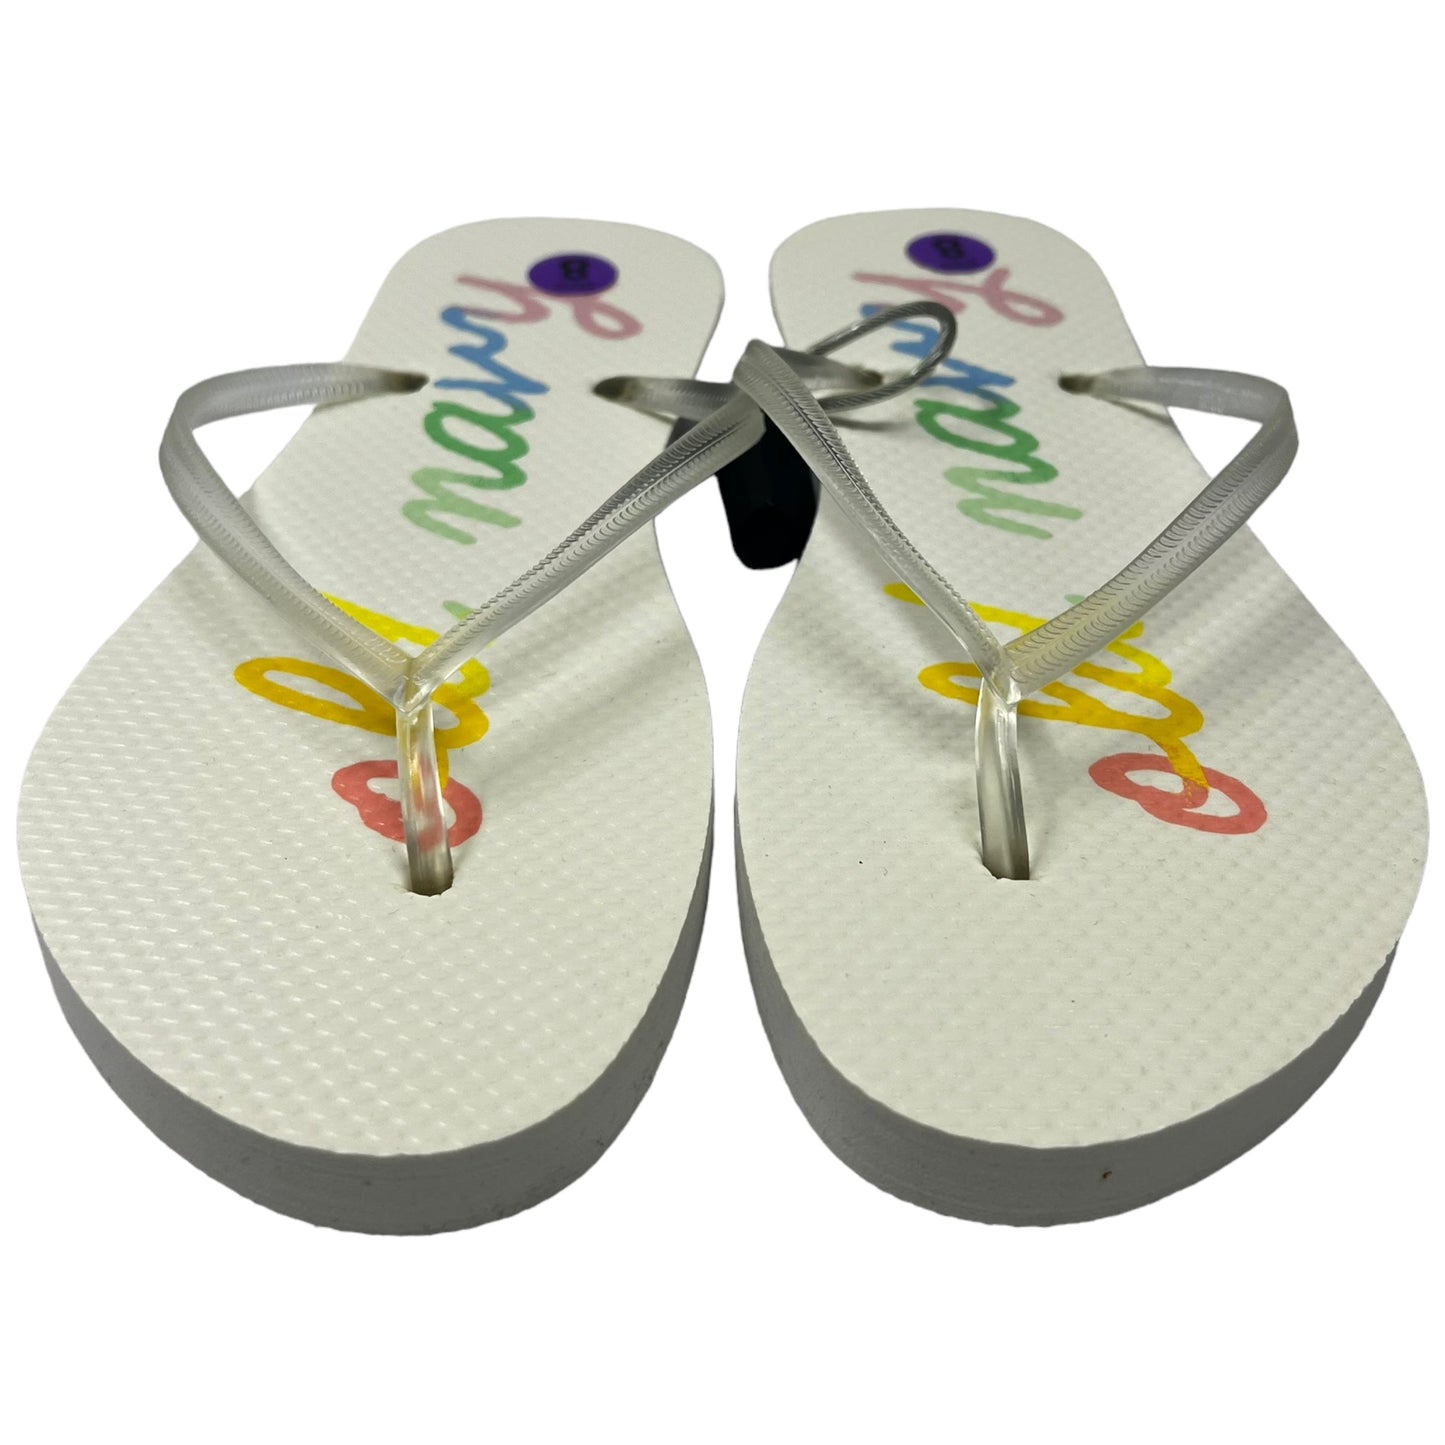 Sandals Flip Flops By Old Navy  Size: 8